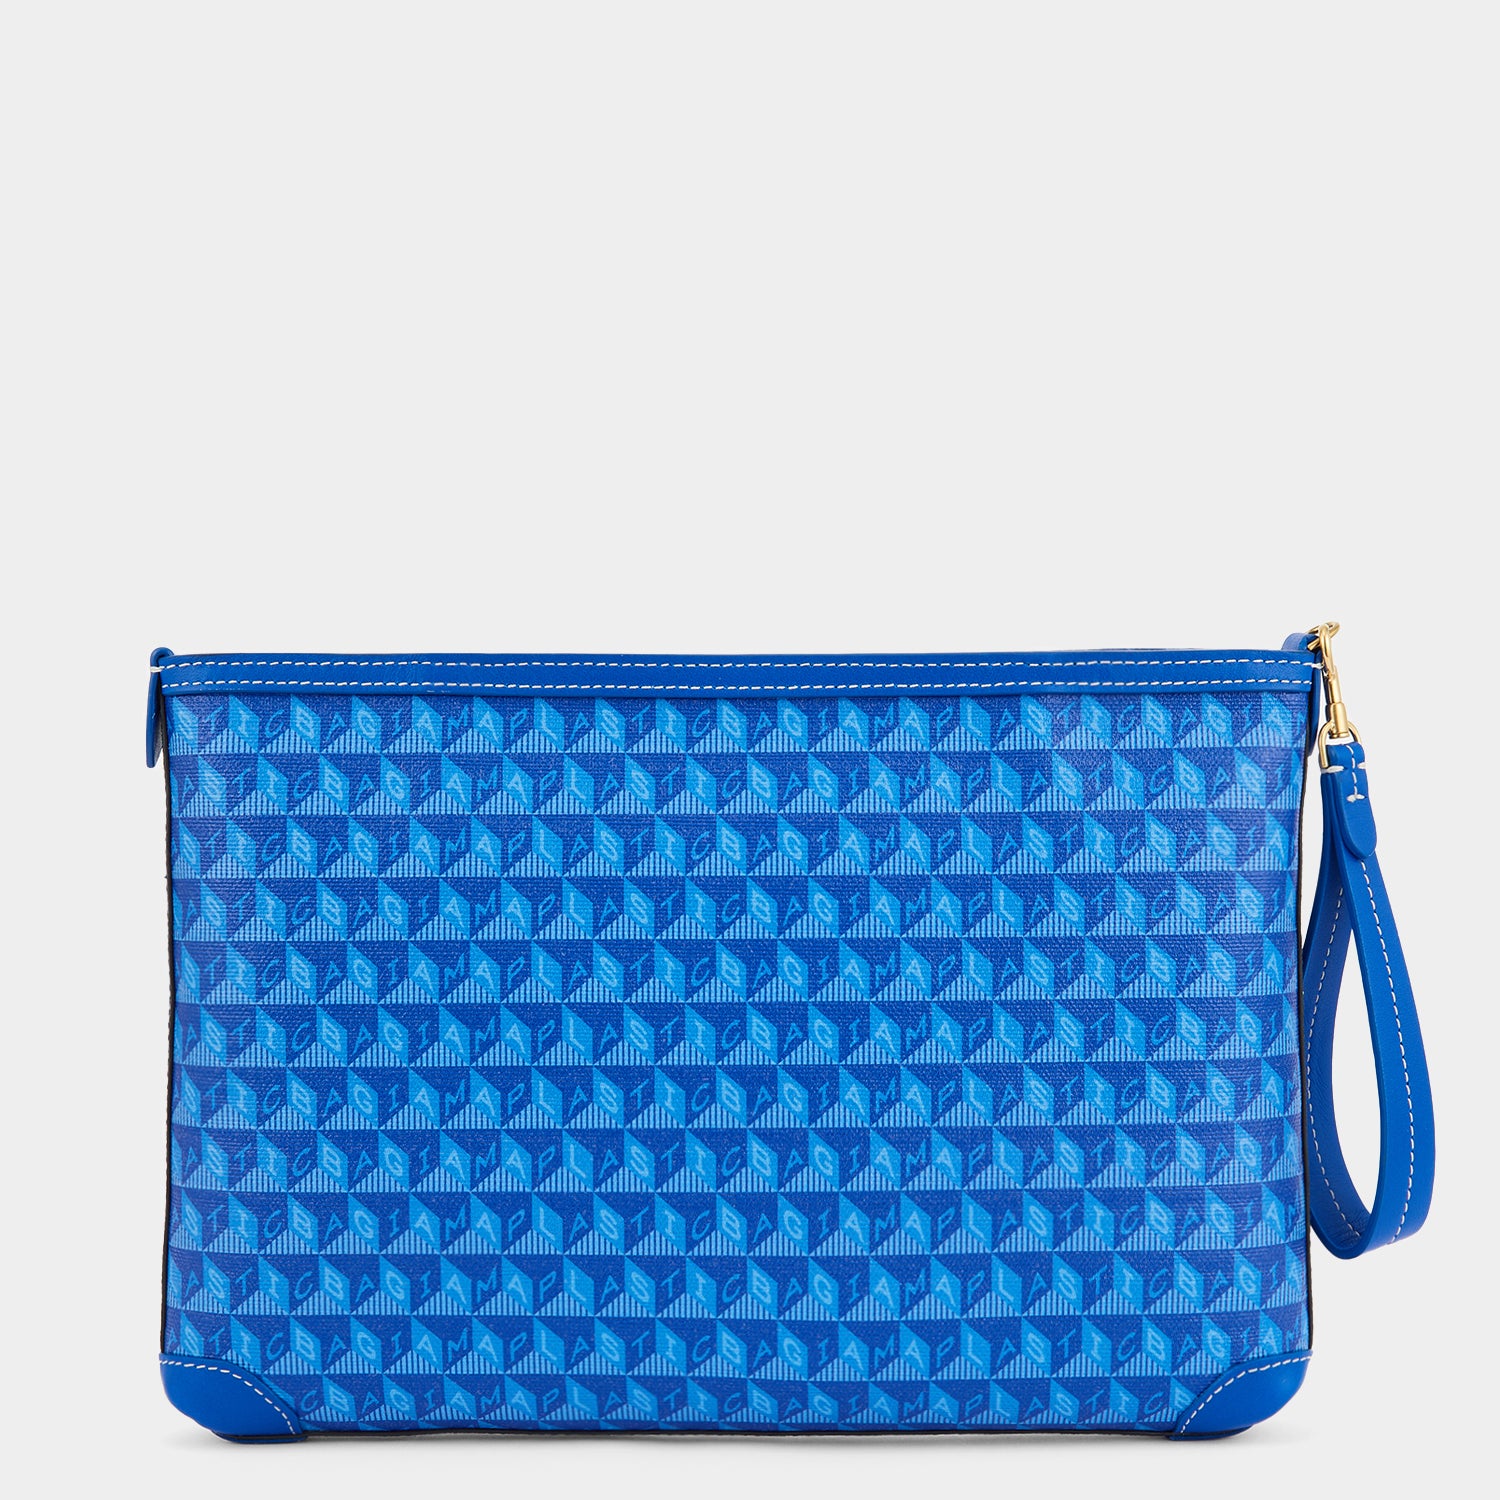 「I AM A Plastic Bag』アイズ ポシェット -

                  
                    Recycled Coated Canvas in Electric Blue -
                  

                  Anya Hindmarch JP
